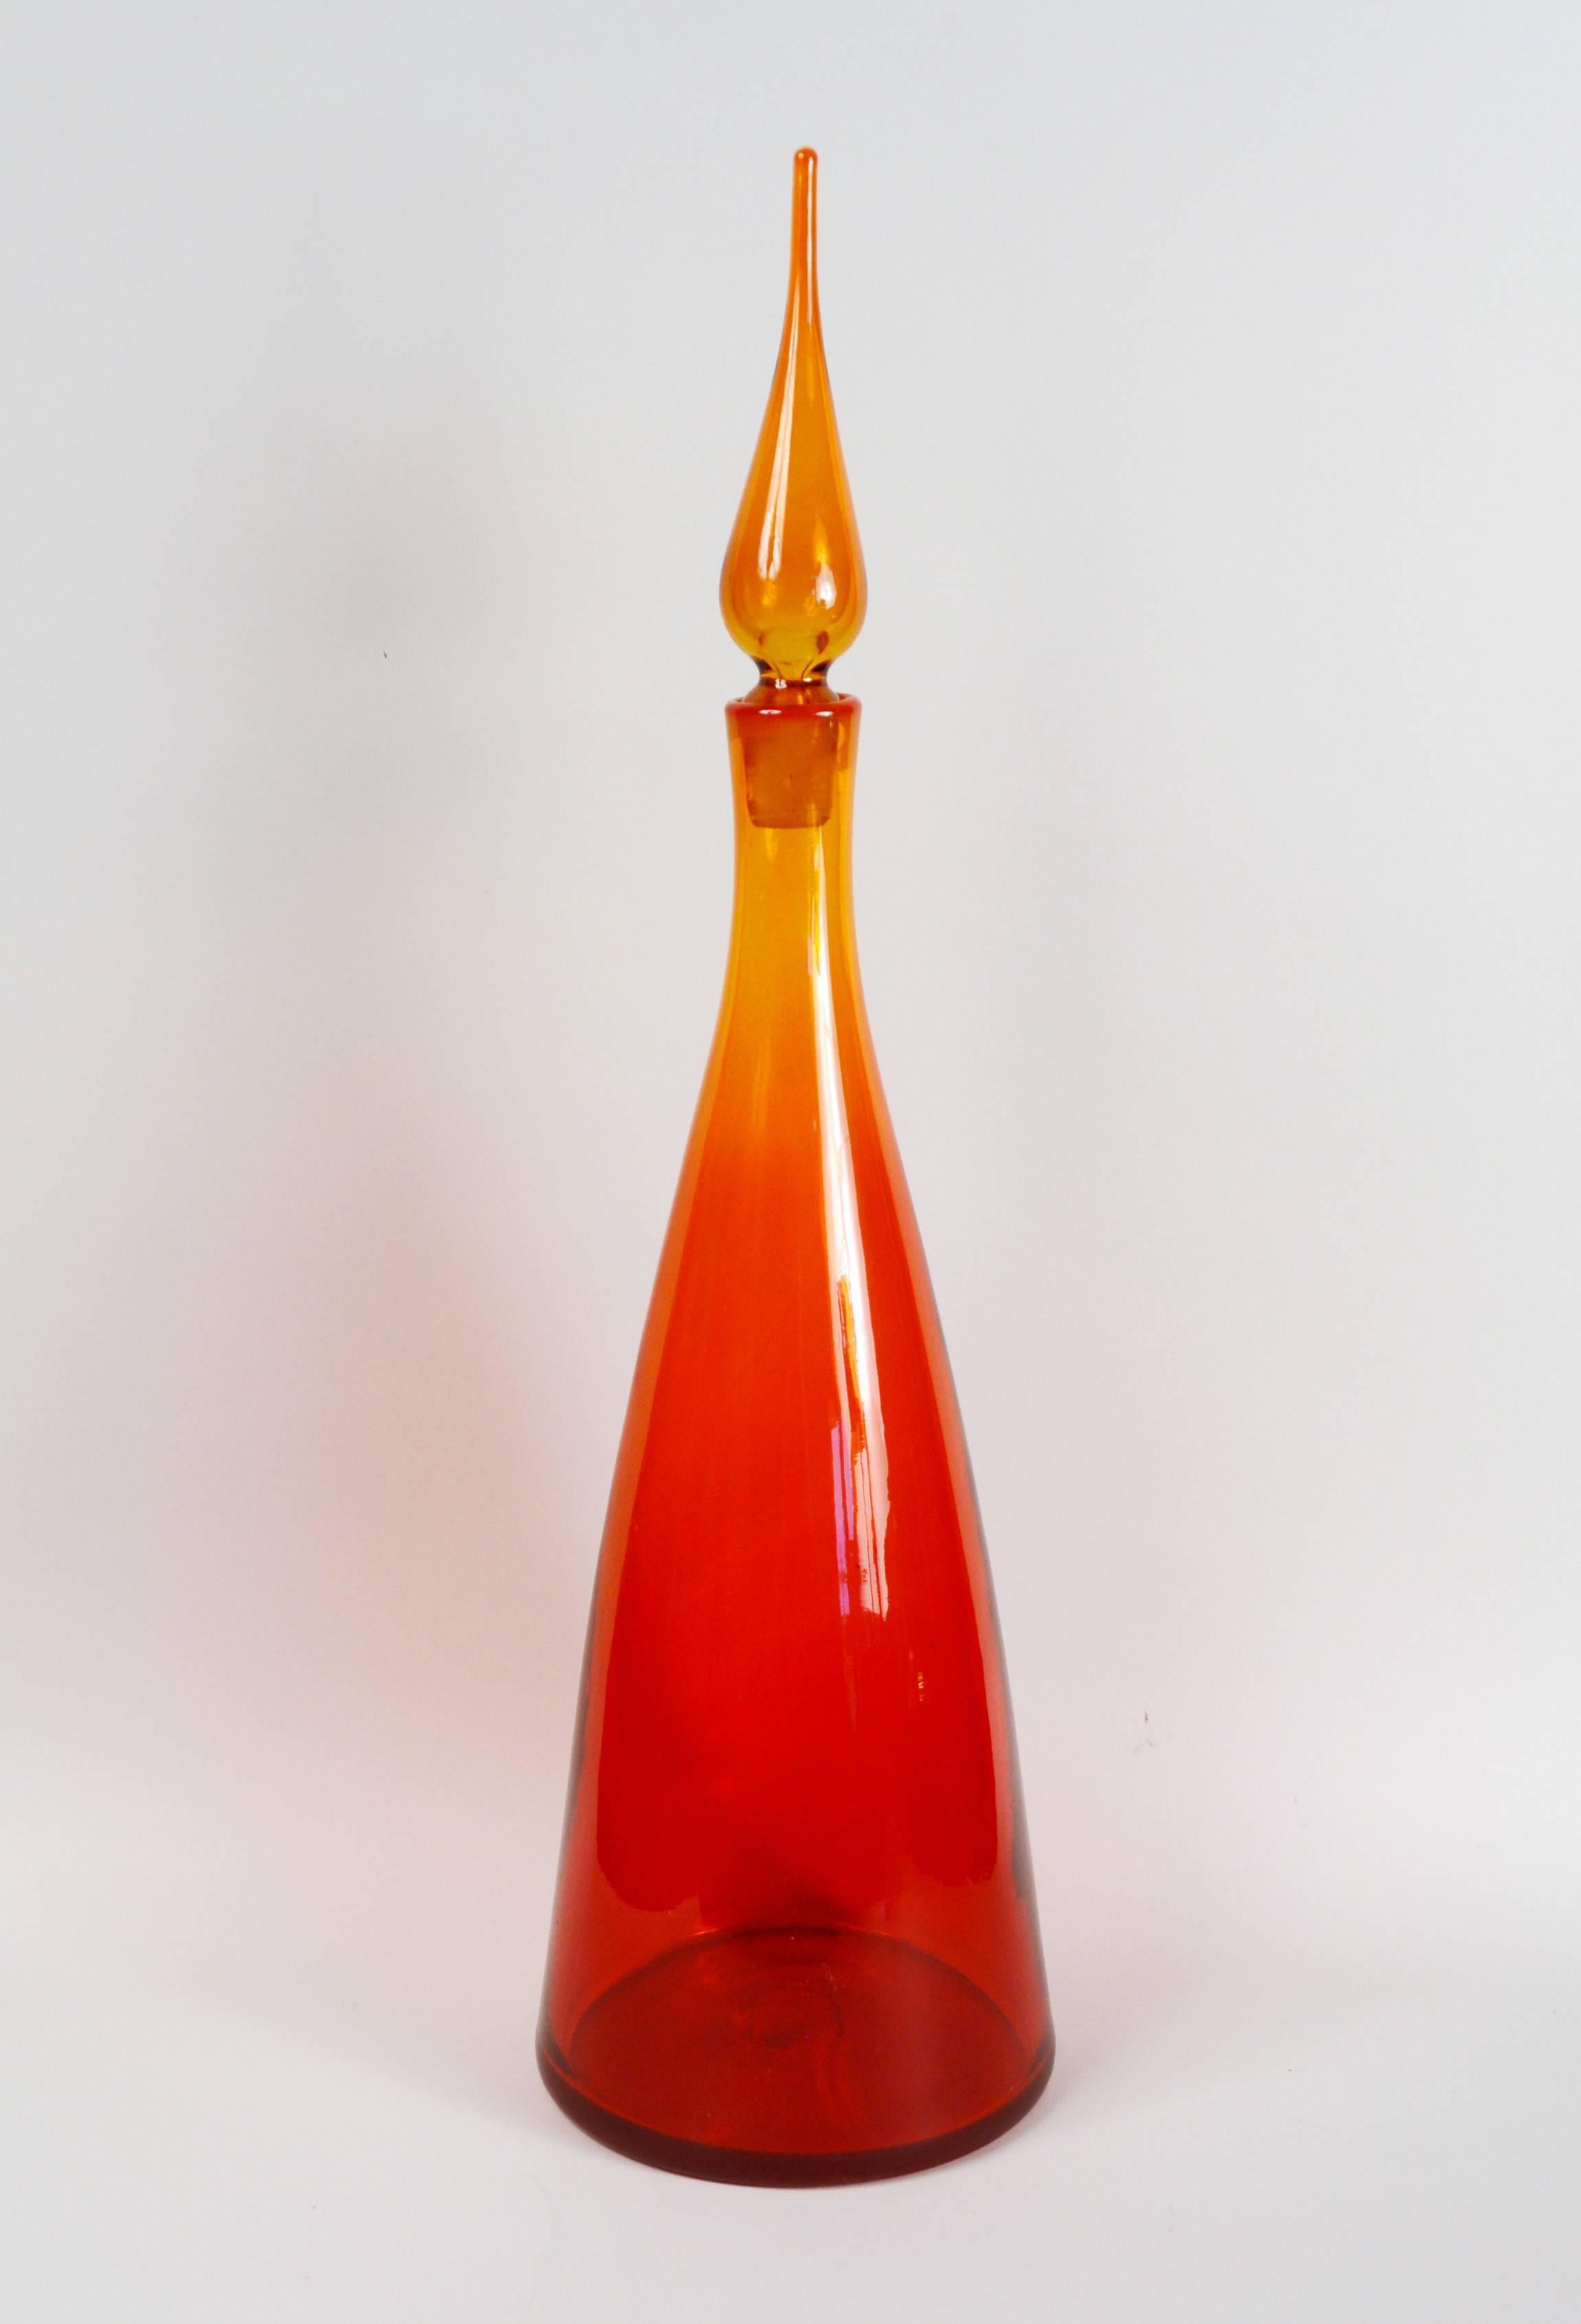 American Collection of Blenko Decanters